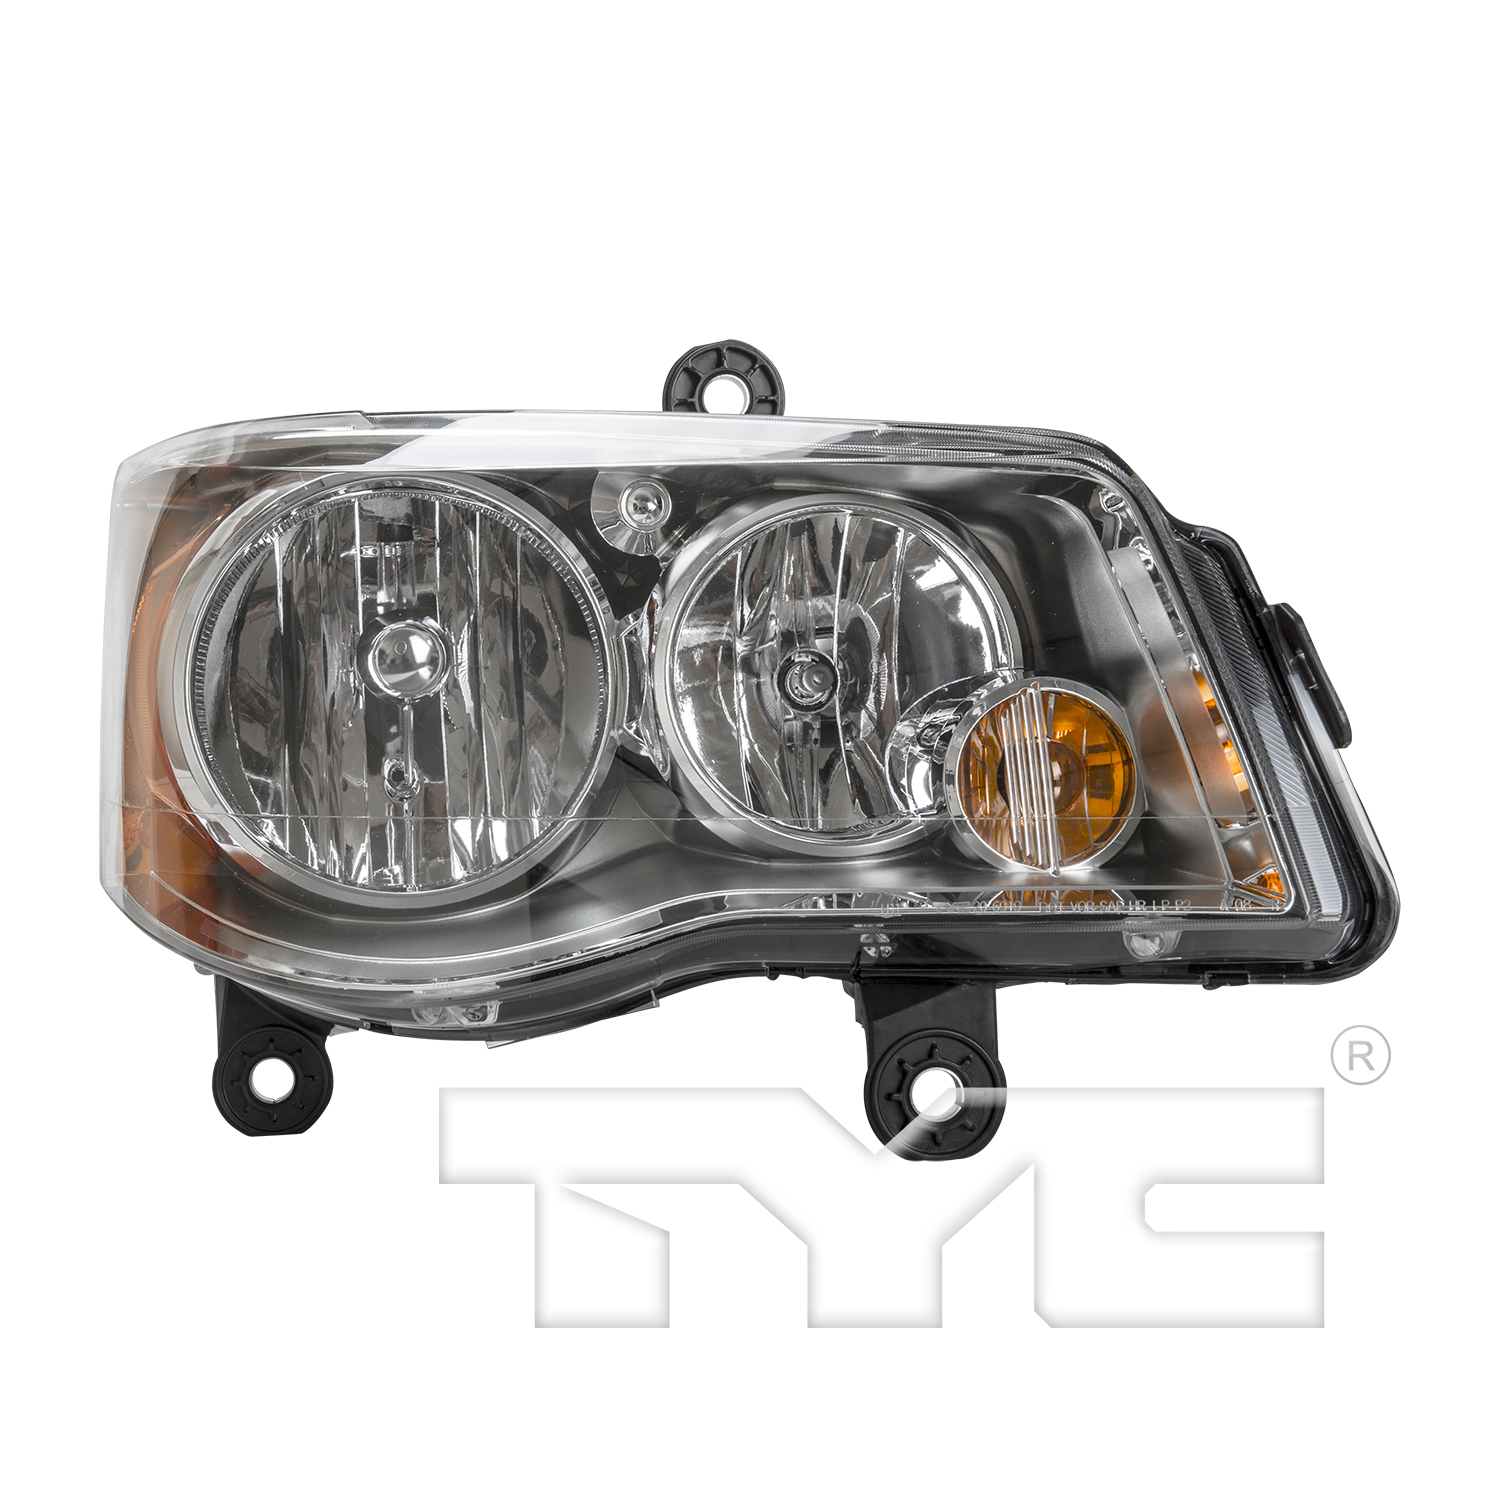 Aftermarket HEADLIGHTS for CHRYSLER - TOWN & COUNTRY, TOWN & COUNTRY,08-16,RT Headlamp assy composite